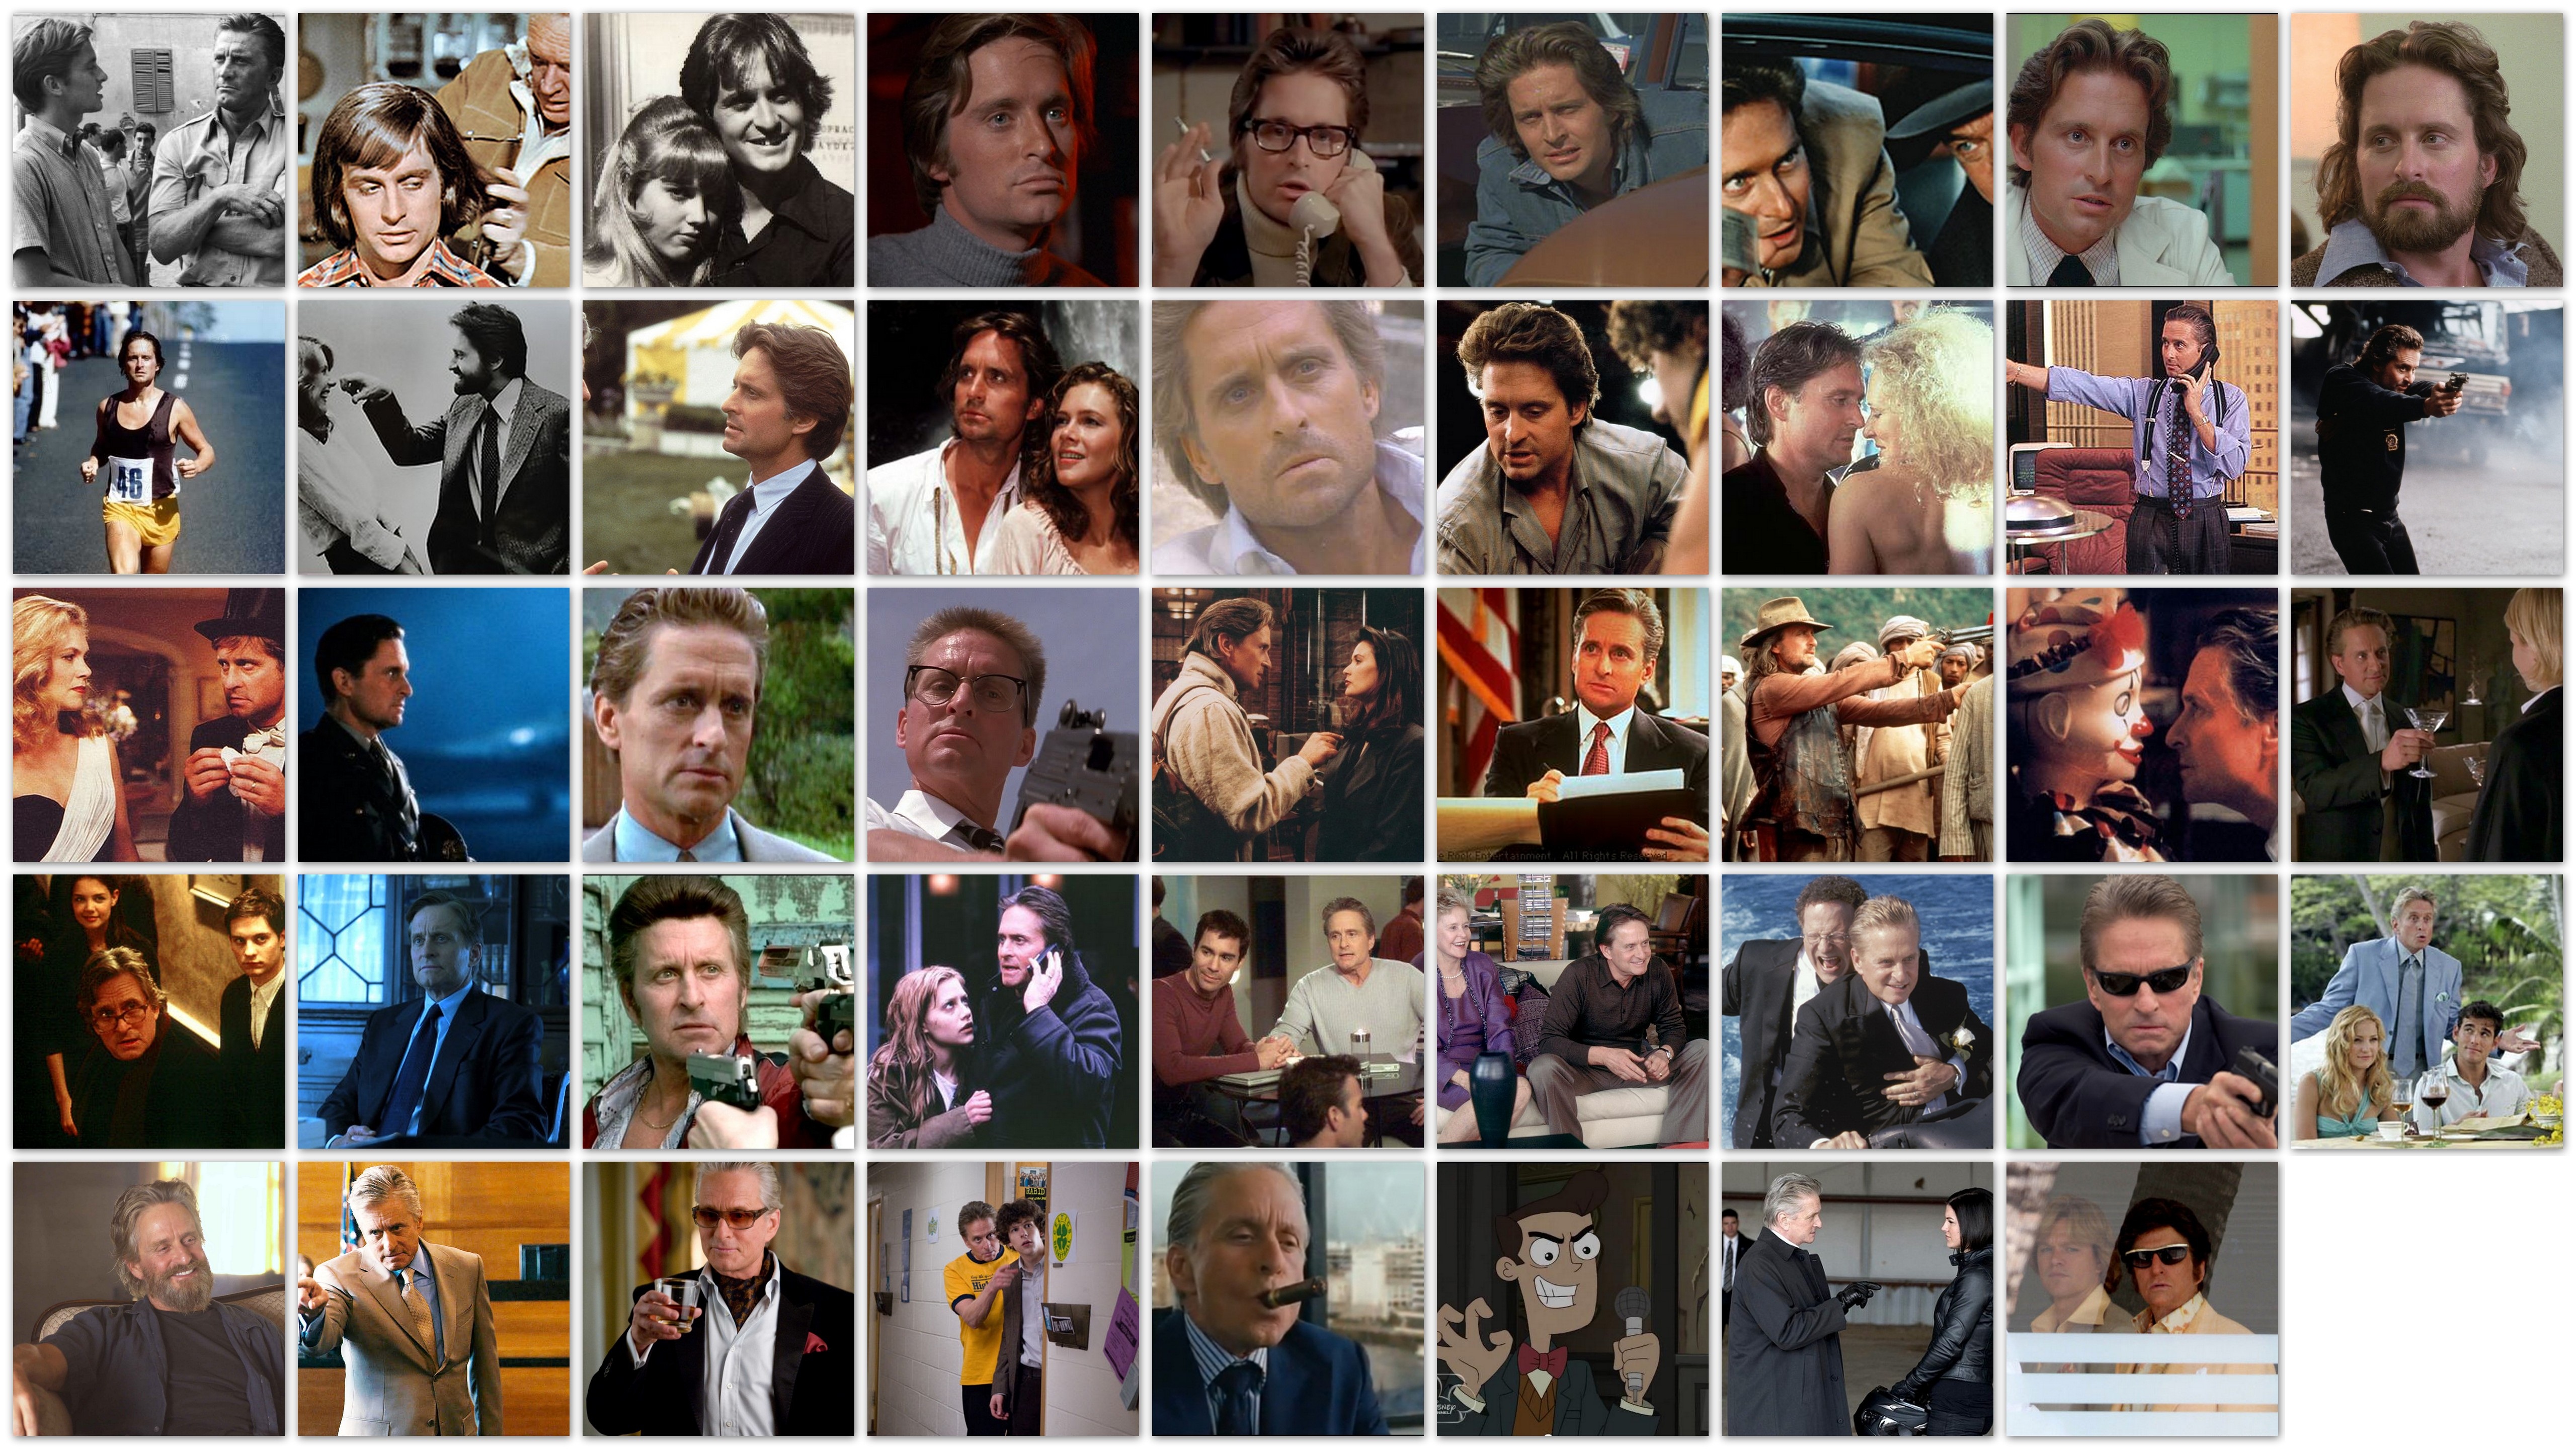 Overview of the roles of actor Michael Douglas in his movies